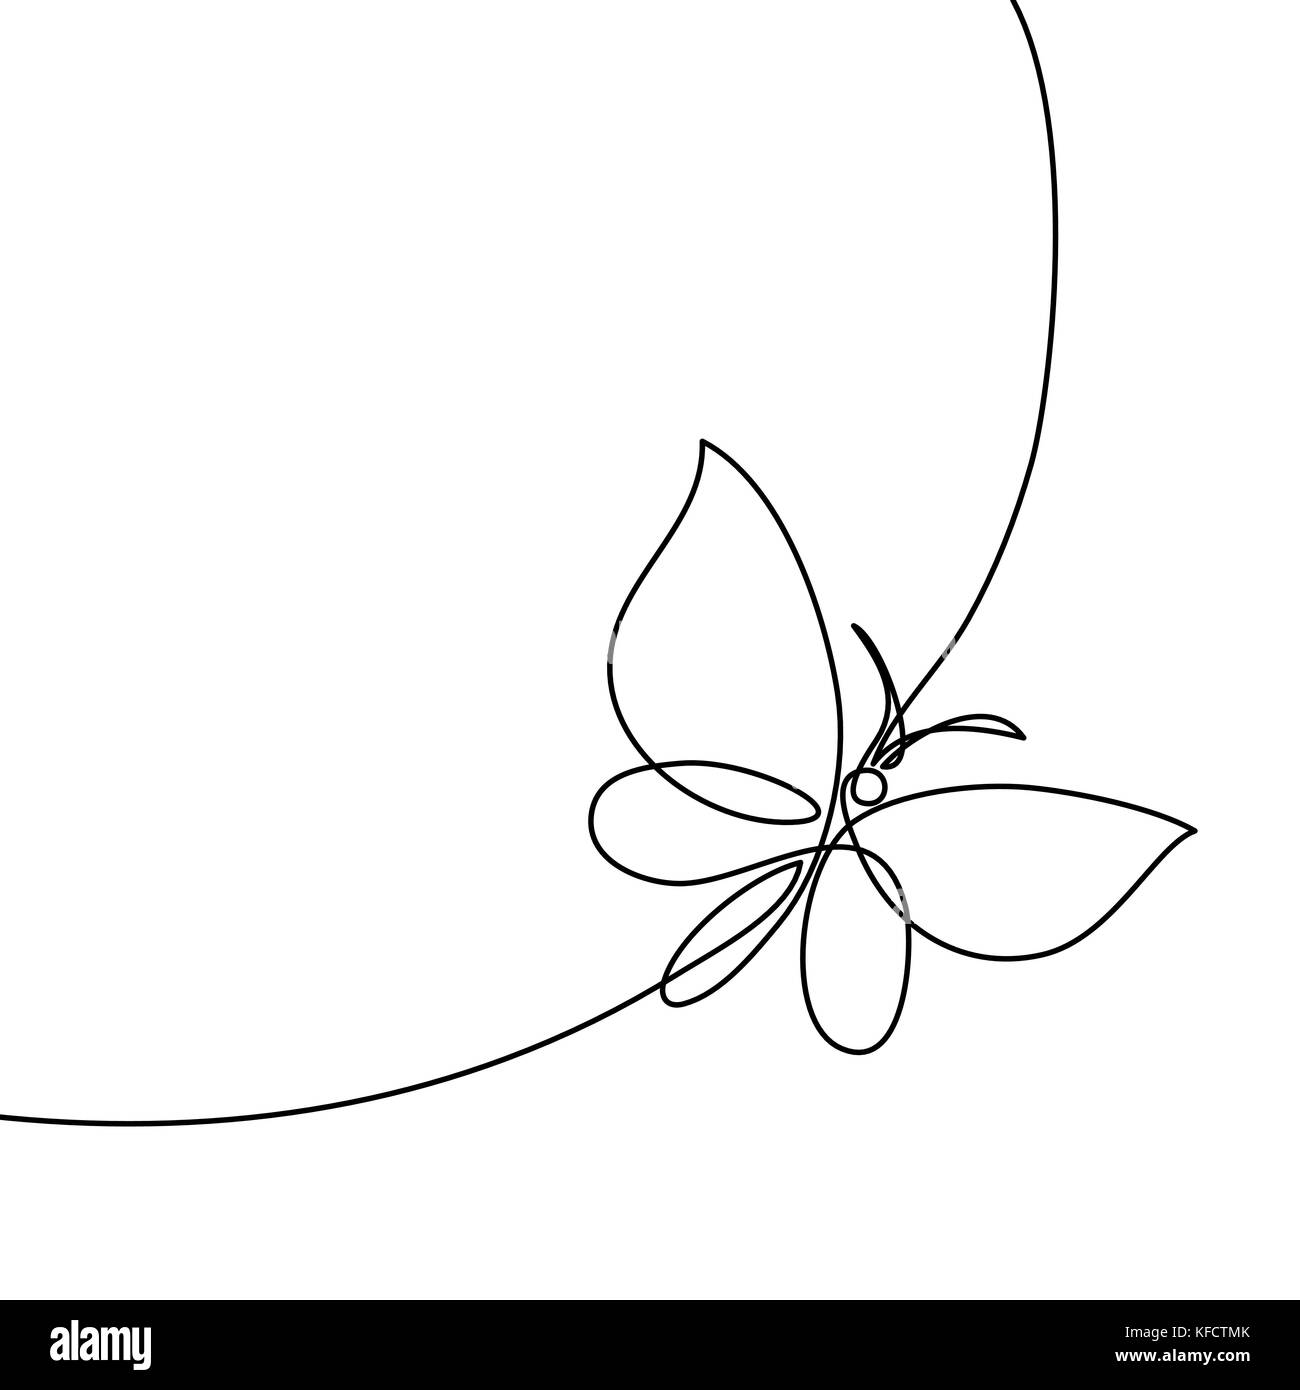 Continuous one line drawing. Flying butterfly logo. Black and white vector illustration. Concept for logo, card, banner, poster, flyer Stock Vector